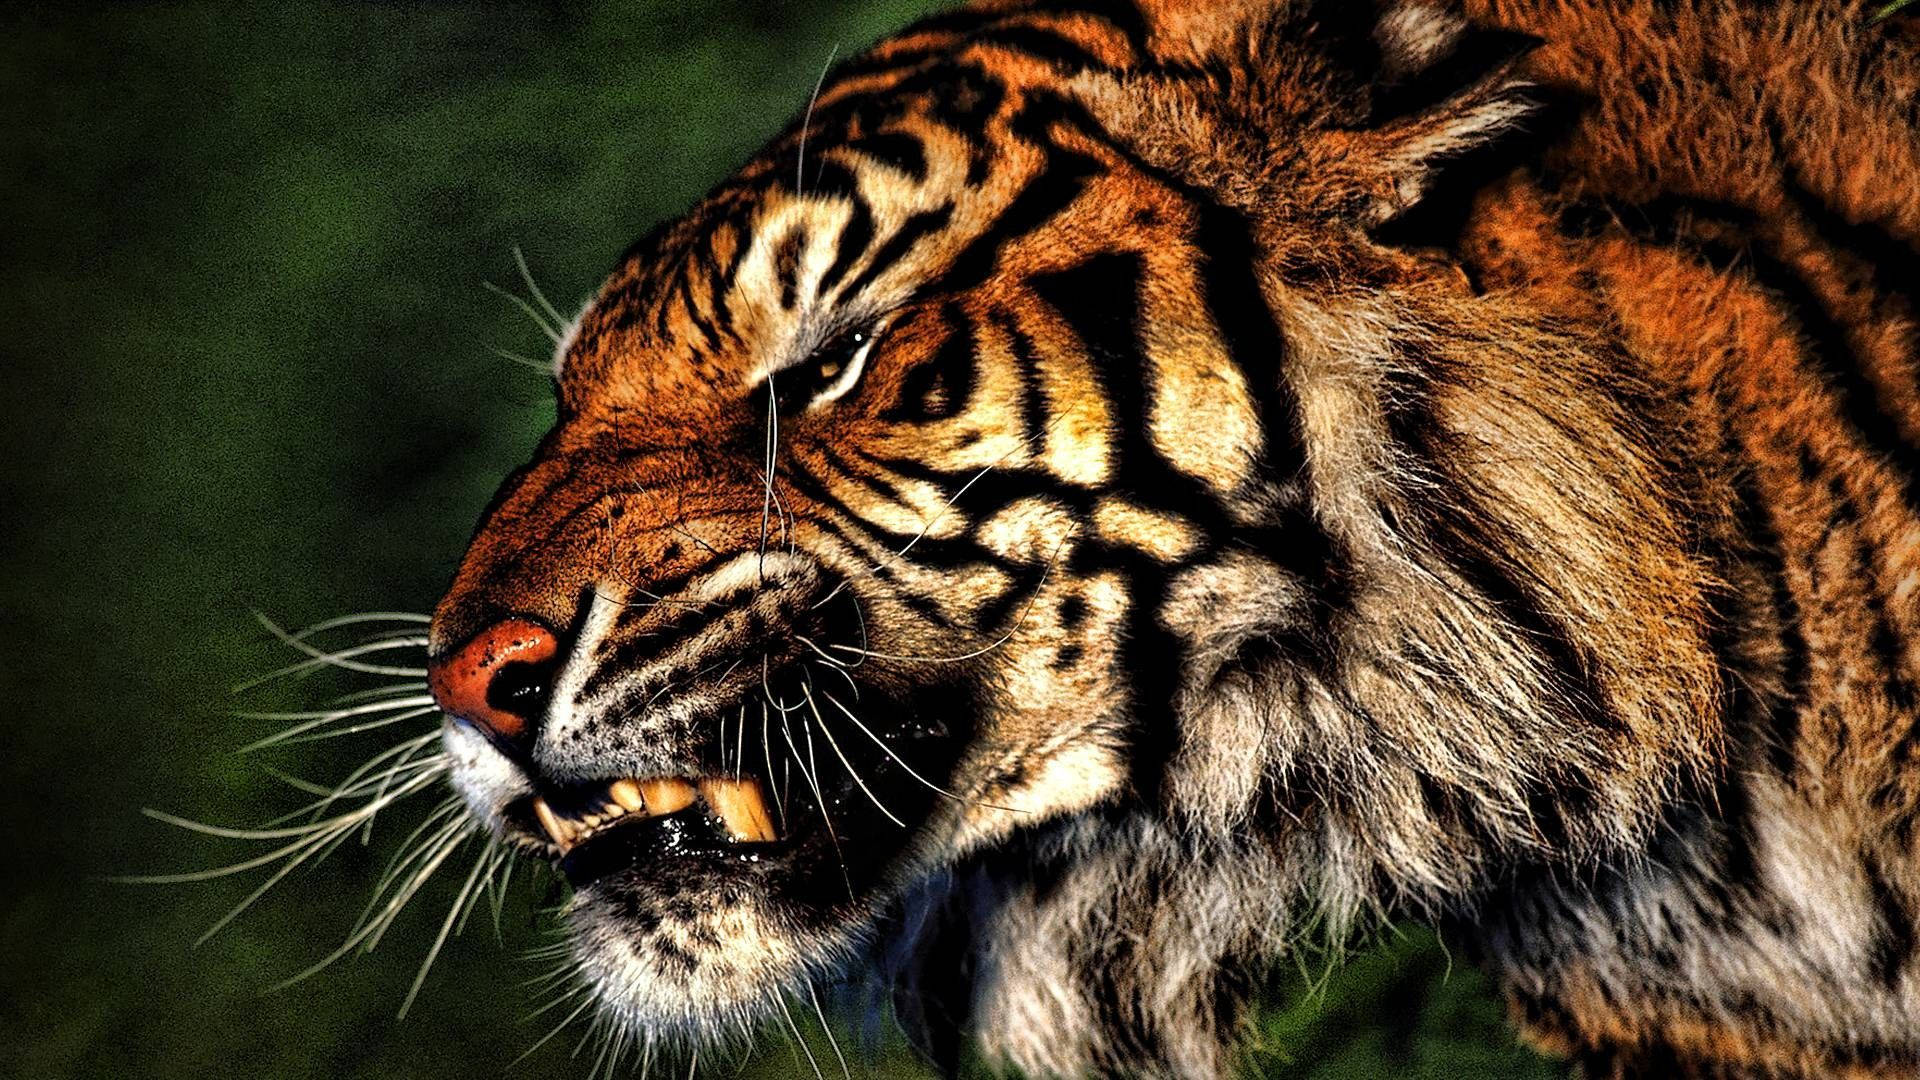 An Angry Tiger Roaring Wallpaper